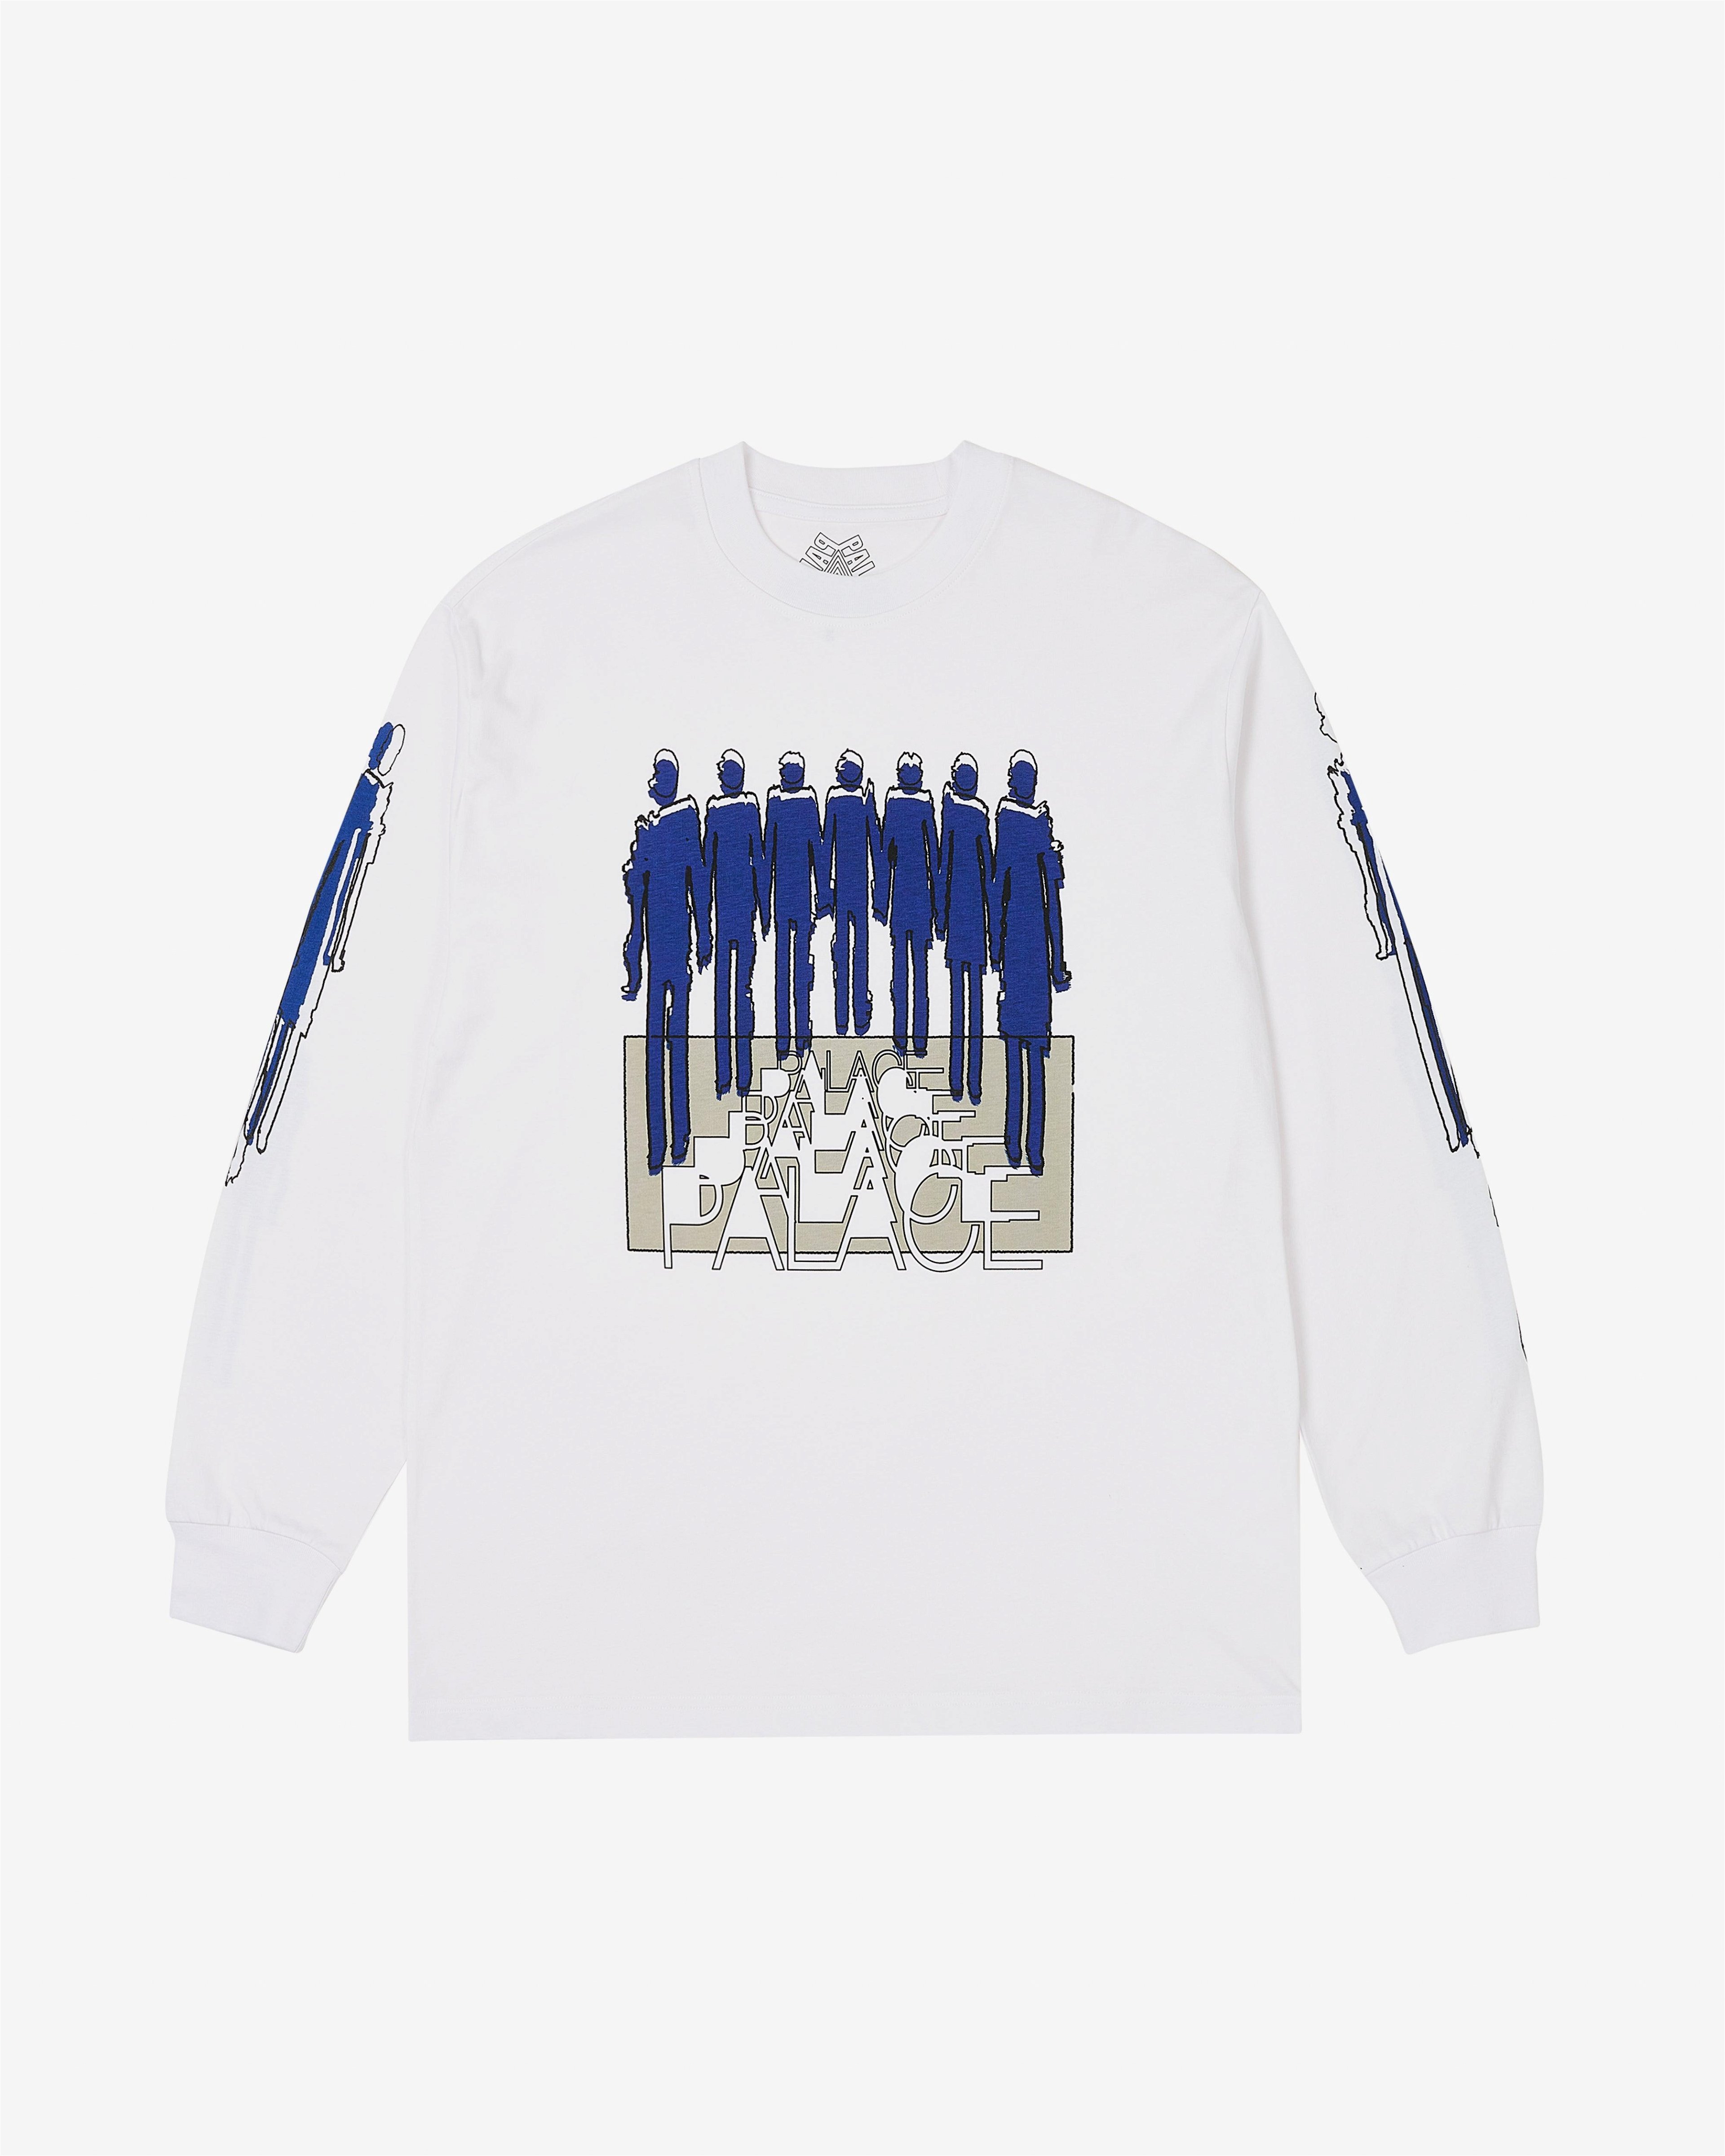 Palace - Men's Repeater Longsleeve - (White) by PALACE